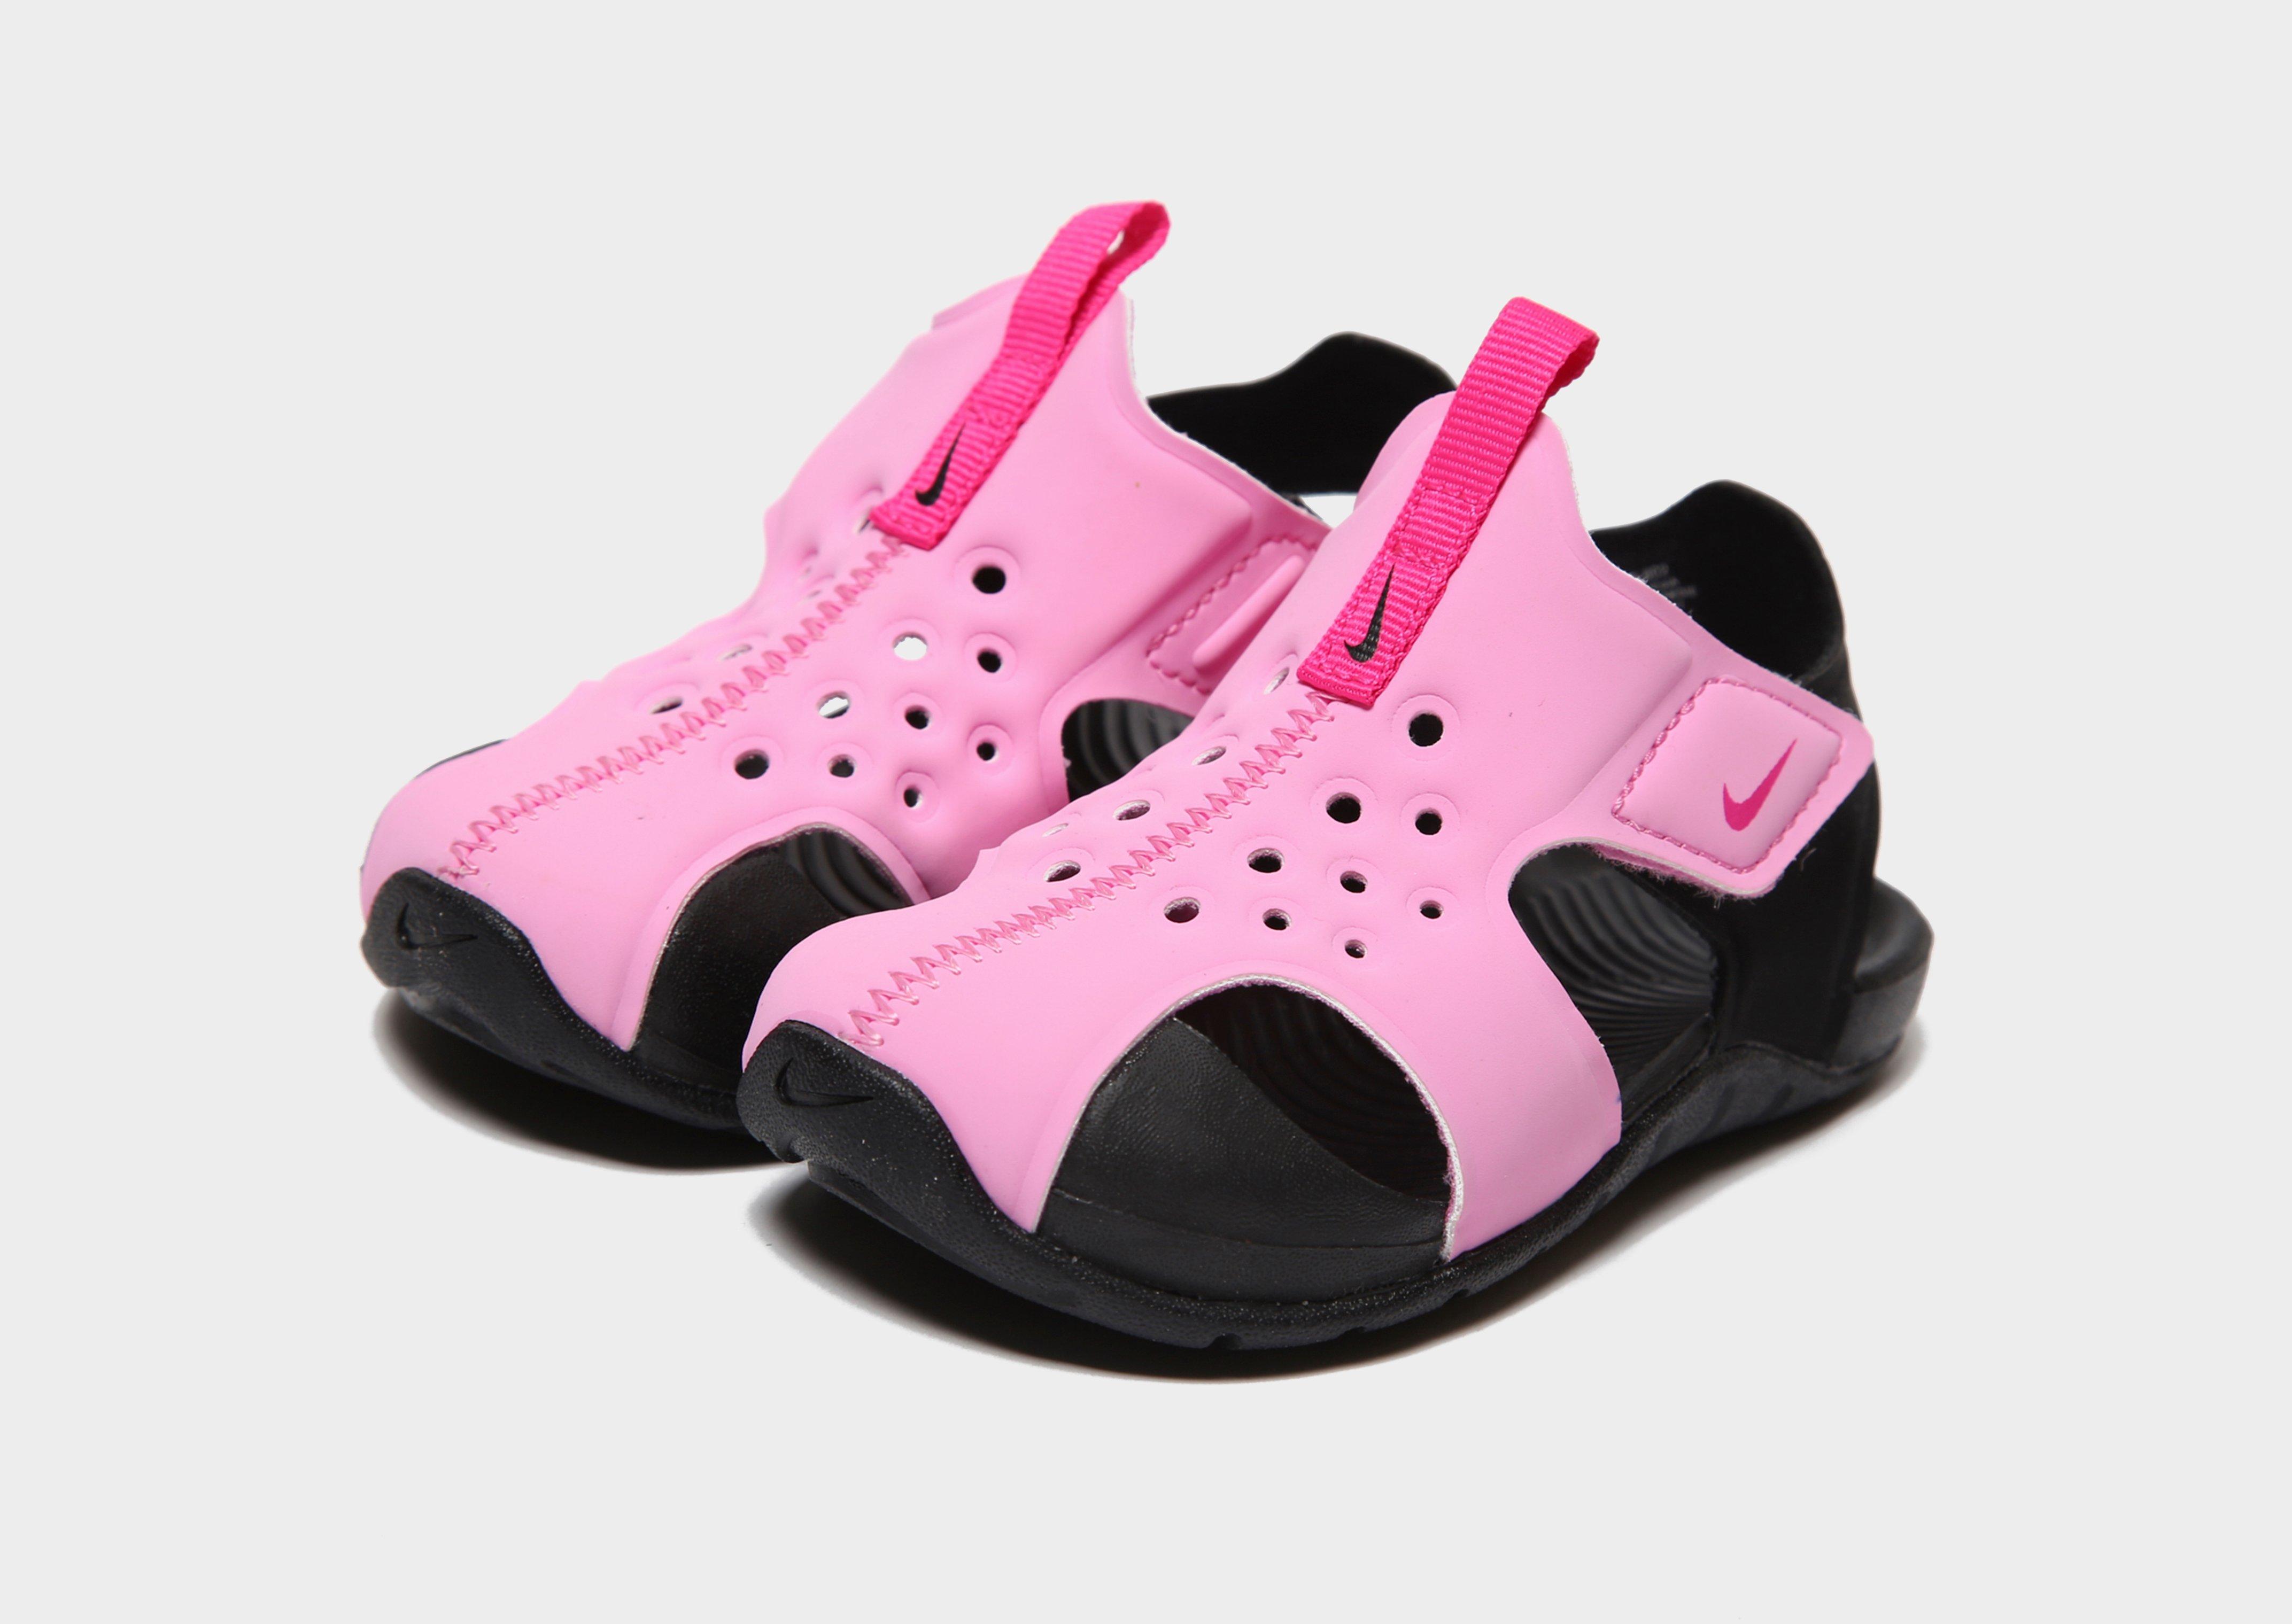 nike sunray protect 2 infant pink